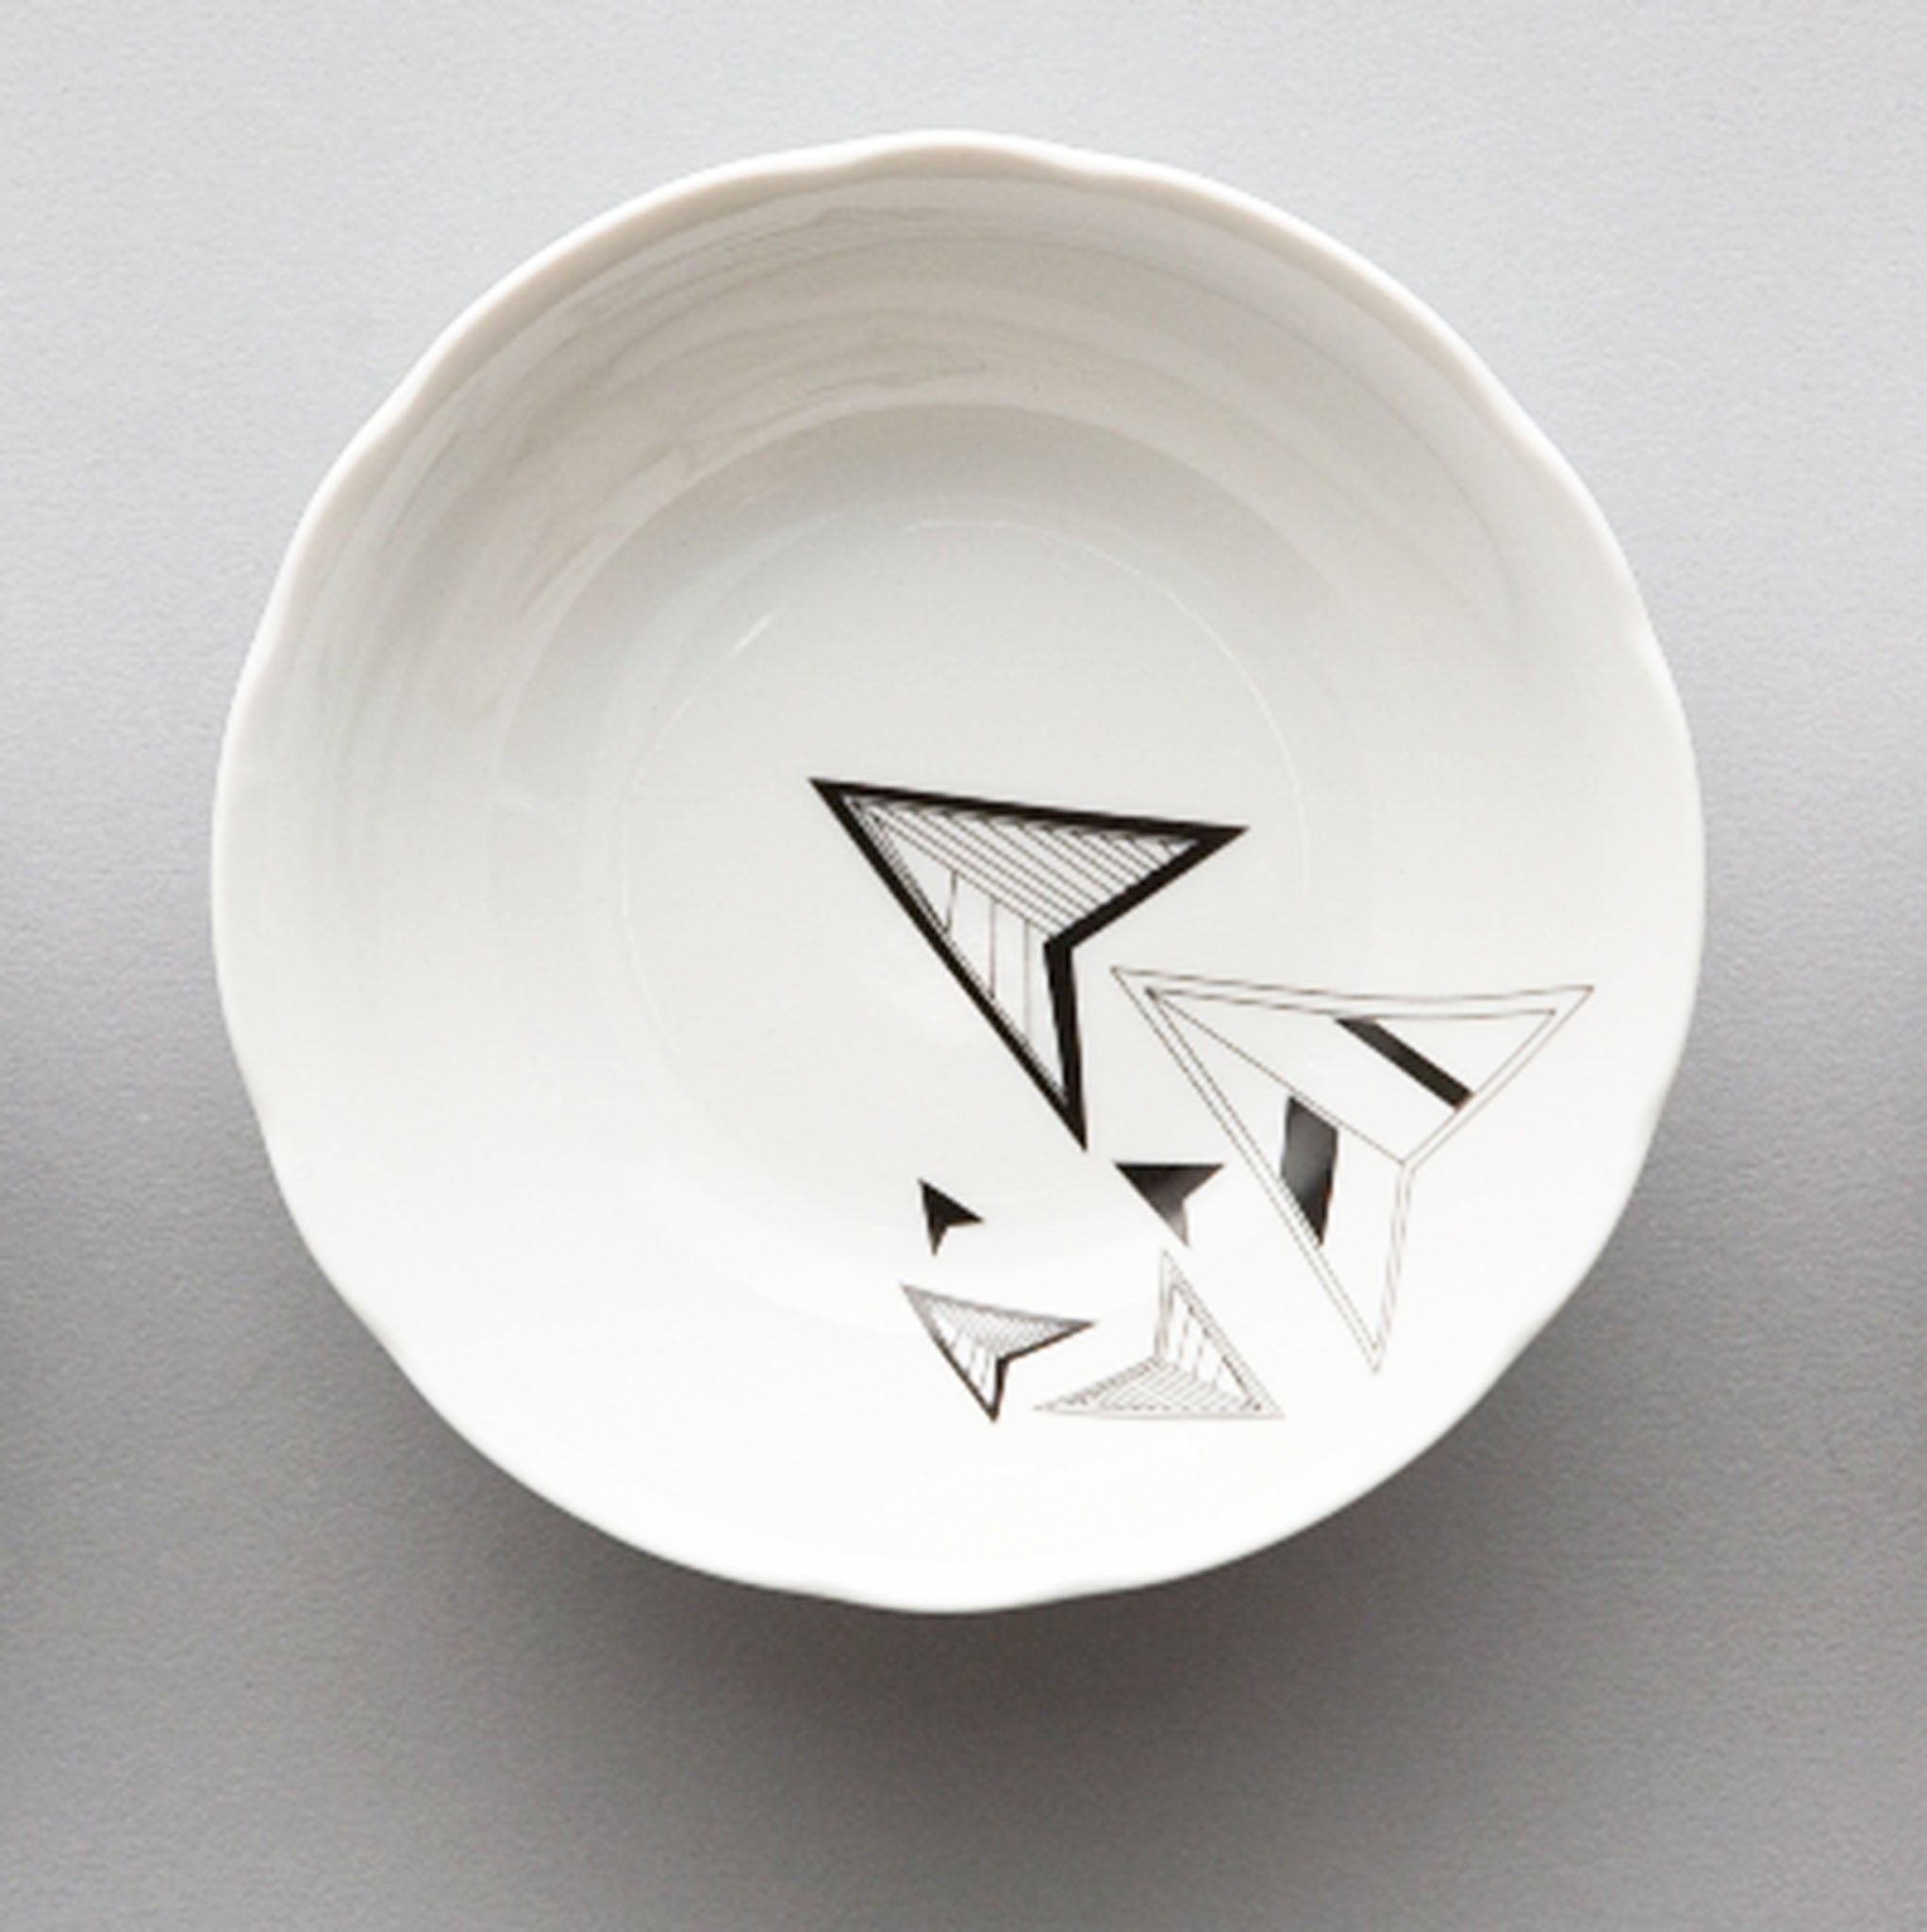 Designed by Colene Blanchet and Annie Lenon, Saetta dishware collection is inspired by maps, paths, geometry, space and lightning. 